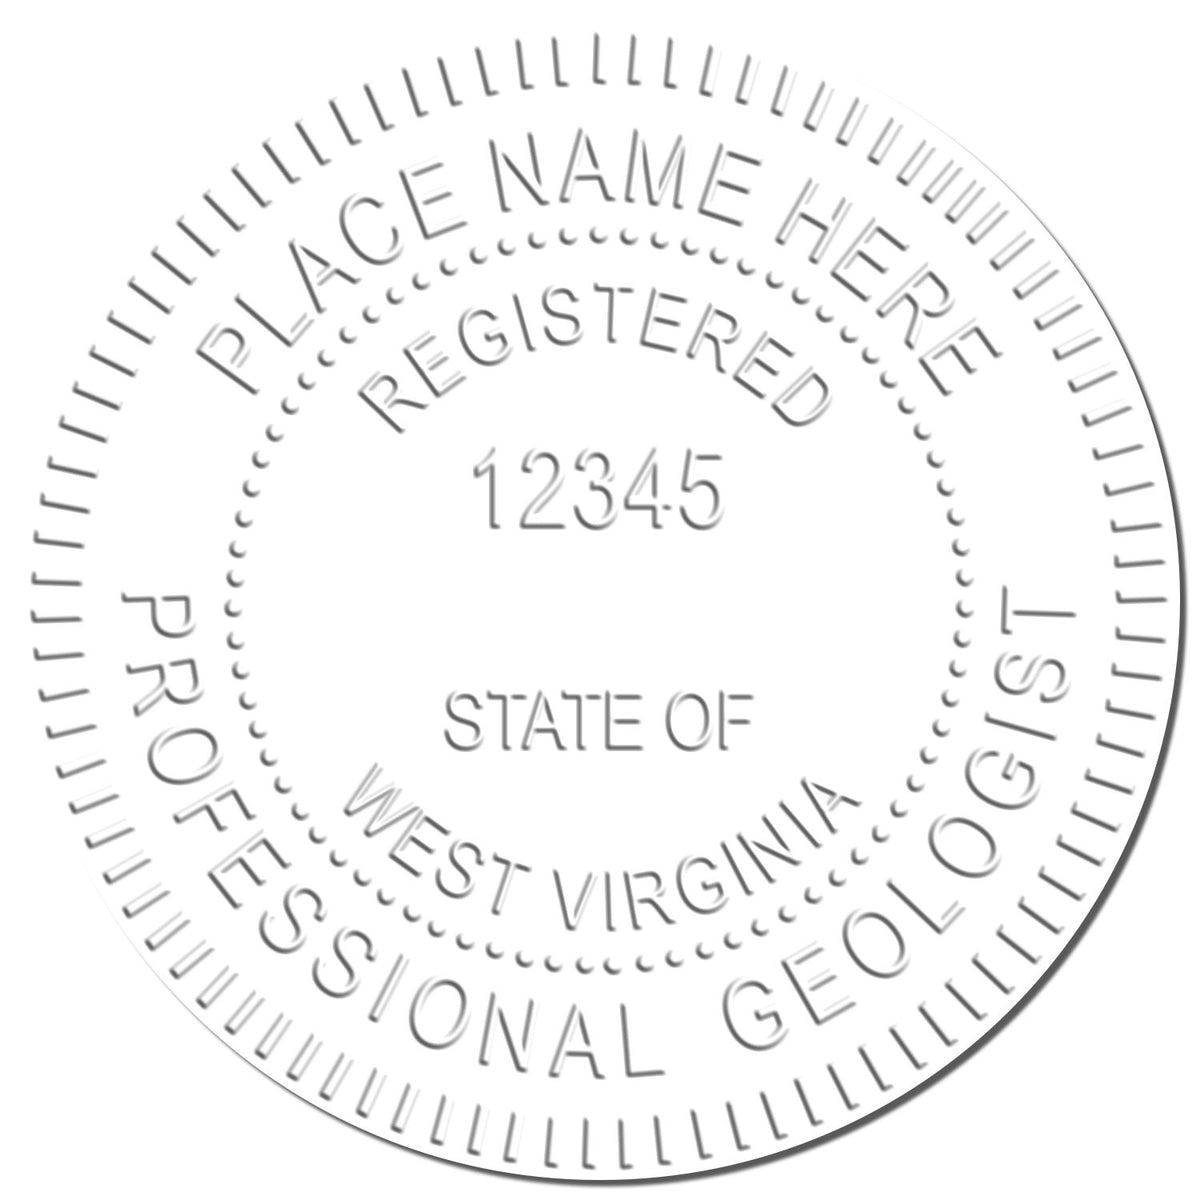 A photograph of the State of West Virginia Extended Long Reach Geologist Seal stamp impression reveals a vivid, professional image of the on paper.